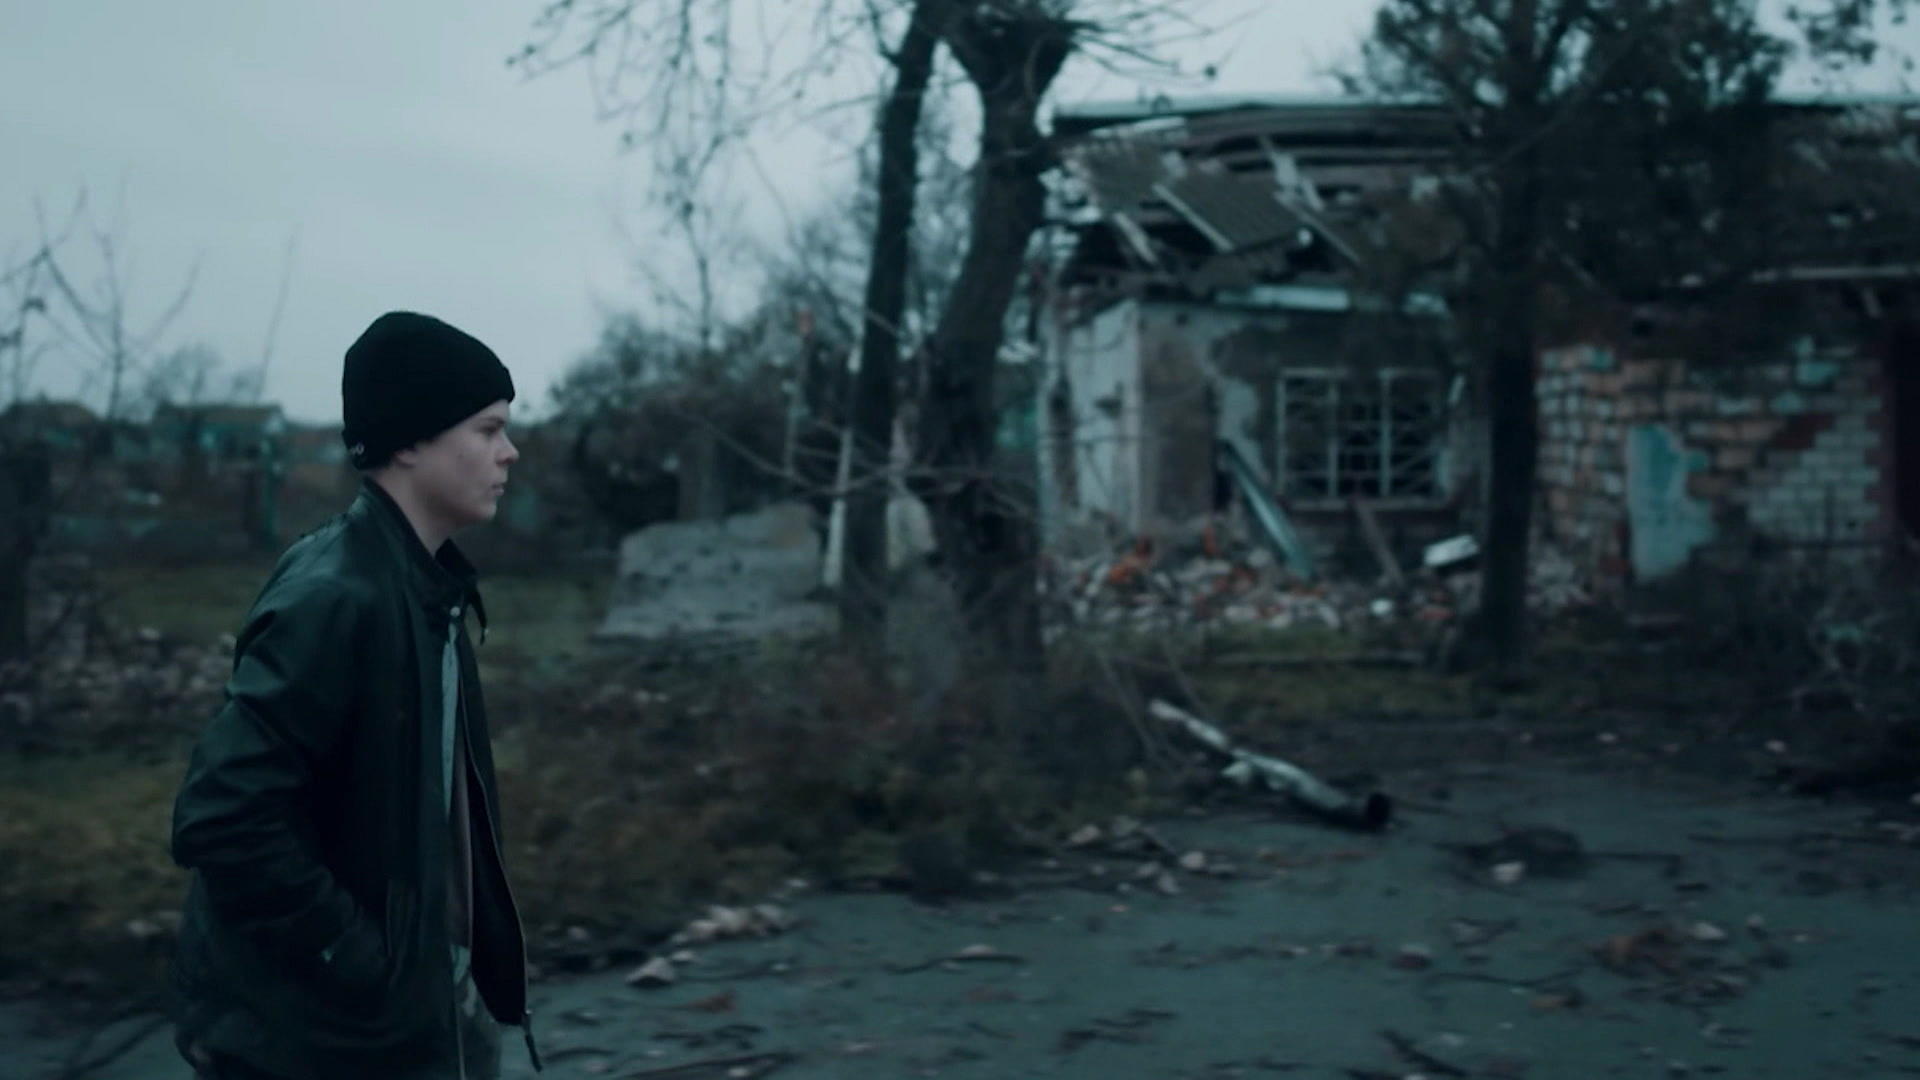 Ukraine: Sasha (14 years old) stands in front of the ruins of his village, and the band gives him new hope